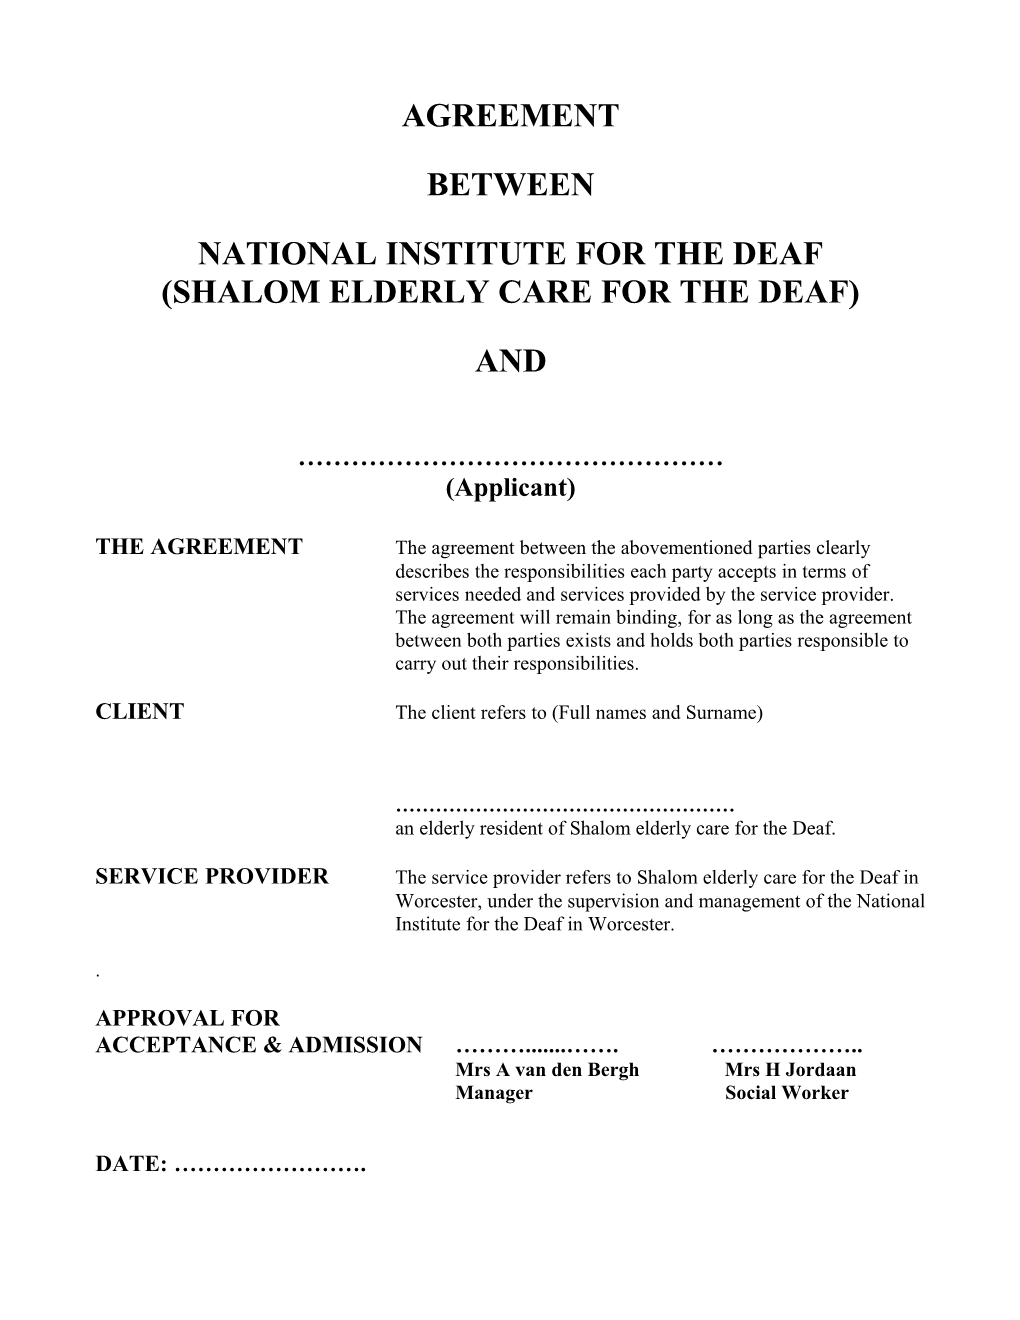 National Institute for the Deaf